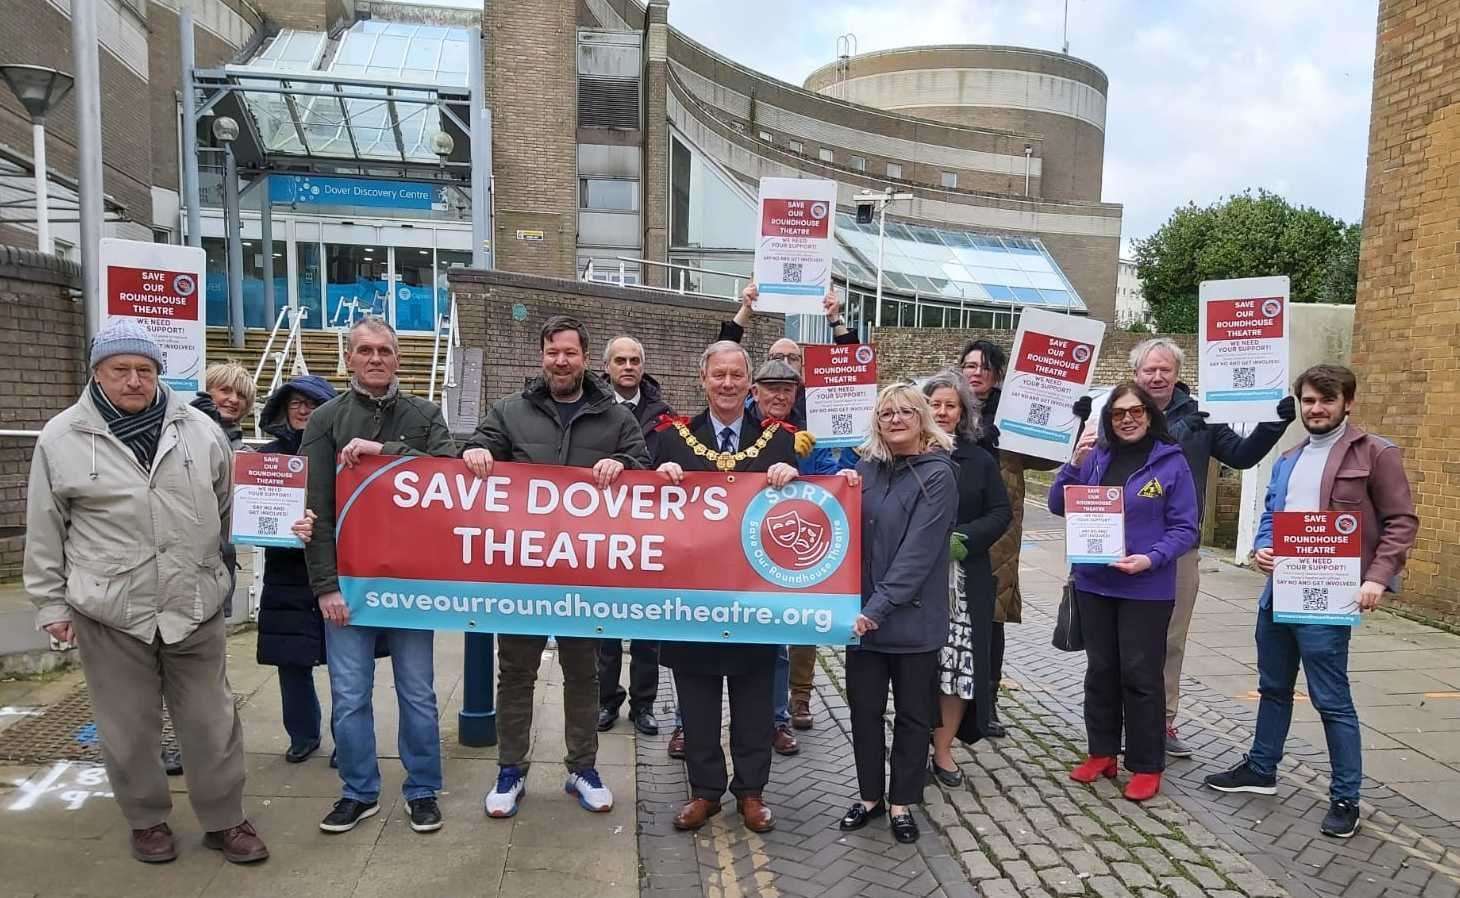 Campaigners have lobbied to save Dover's only theatre. Picture: Save Our Roundhouse Theatre